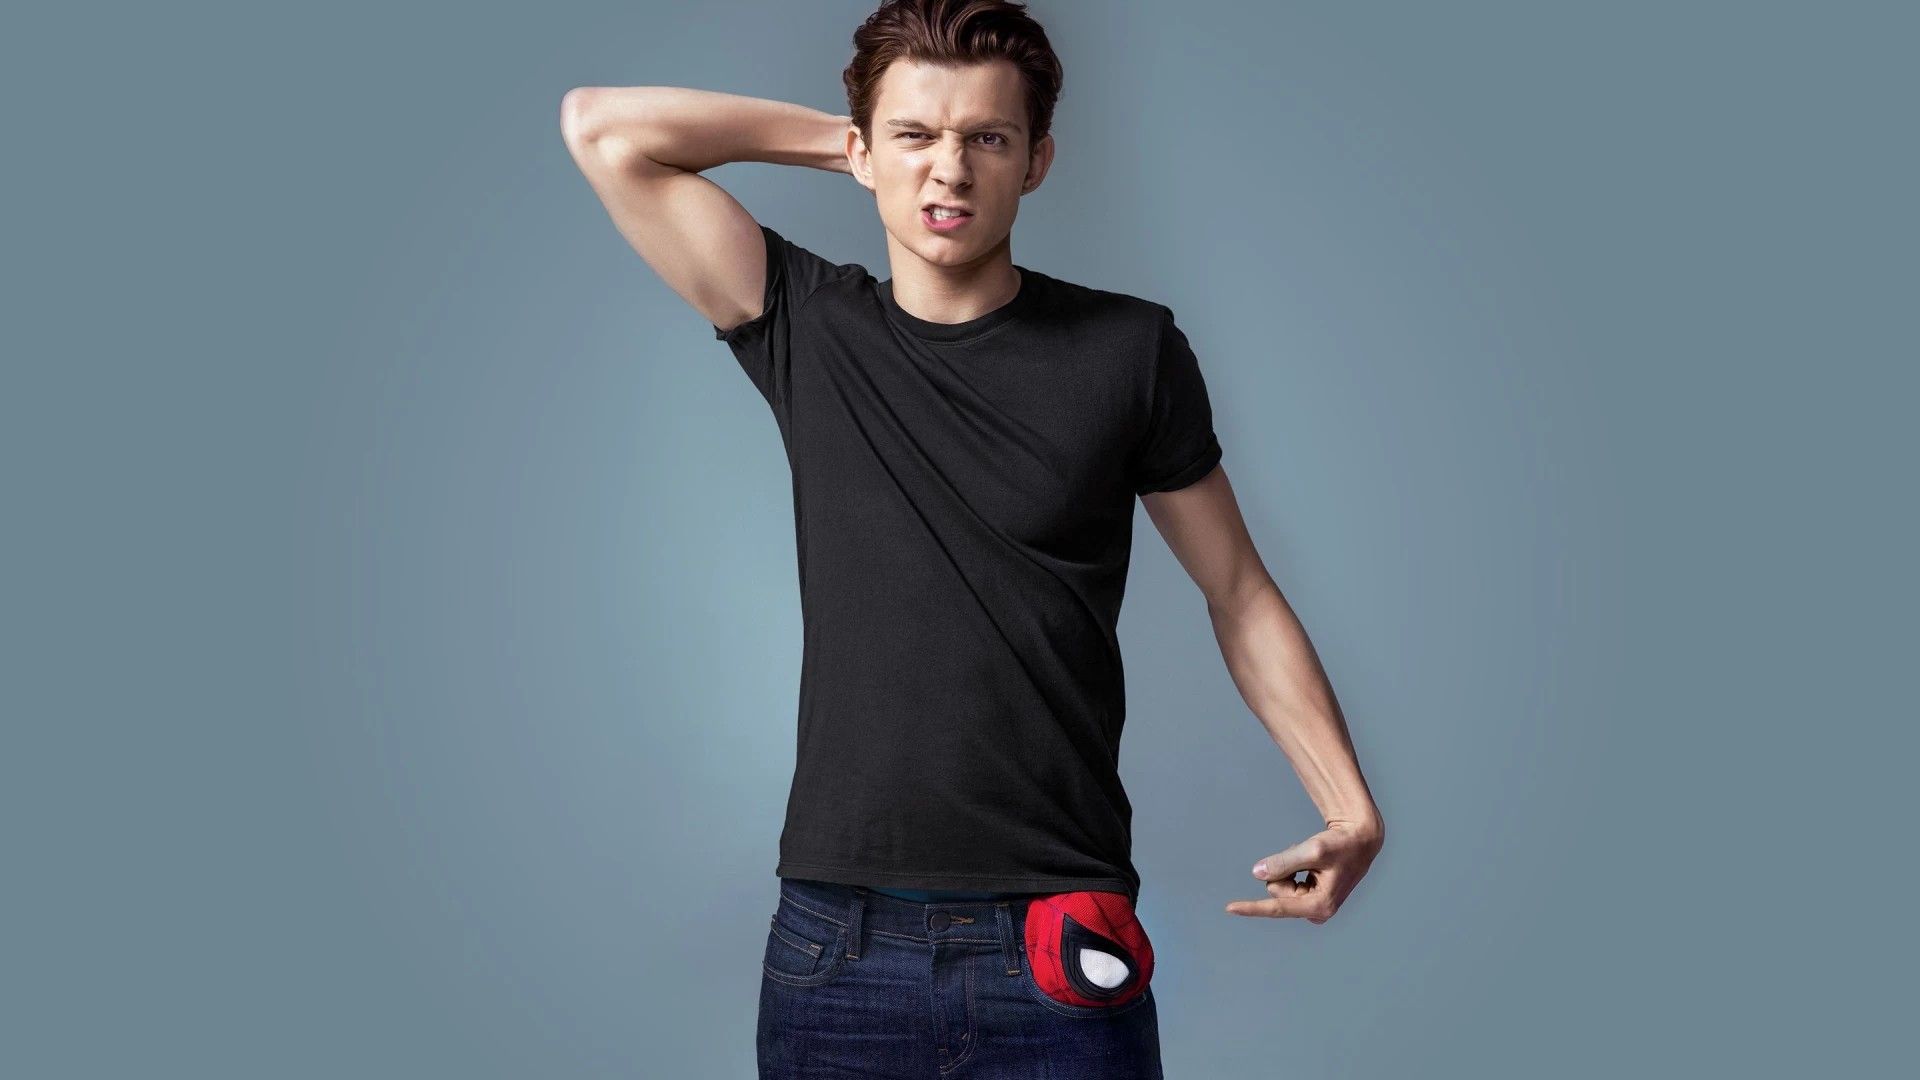 free cool Tom Holland chrome extension HD wallpaper theme tab for chrome browser!